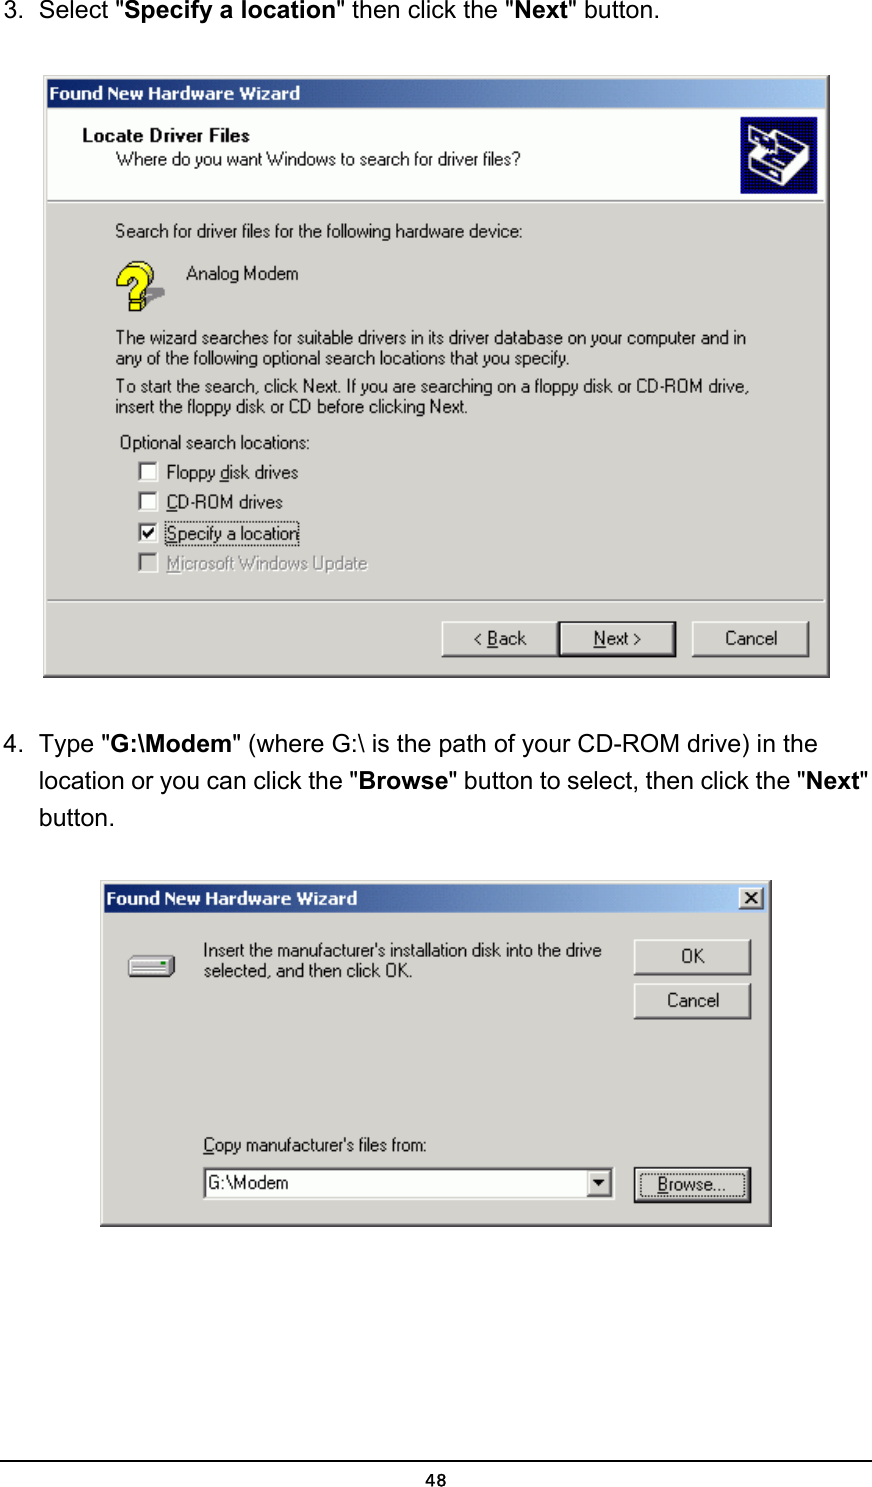   483. Select &quot;Specify a location&quot; then click the &quot;Next&quot; button.  4. Type &quot;G:\Modem&quot; (where G:\ is the path of your CD-ROM drive) in the location or you can click the &quot;Browse&quot; button to select, then click the &quot;Next&quot; button.  